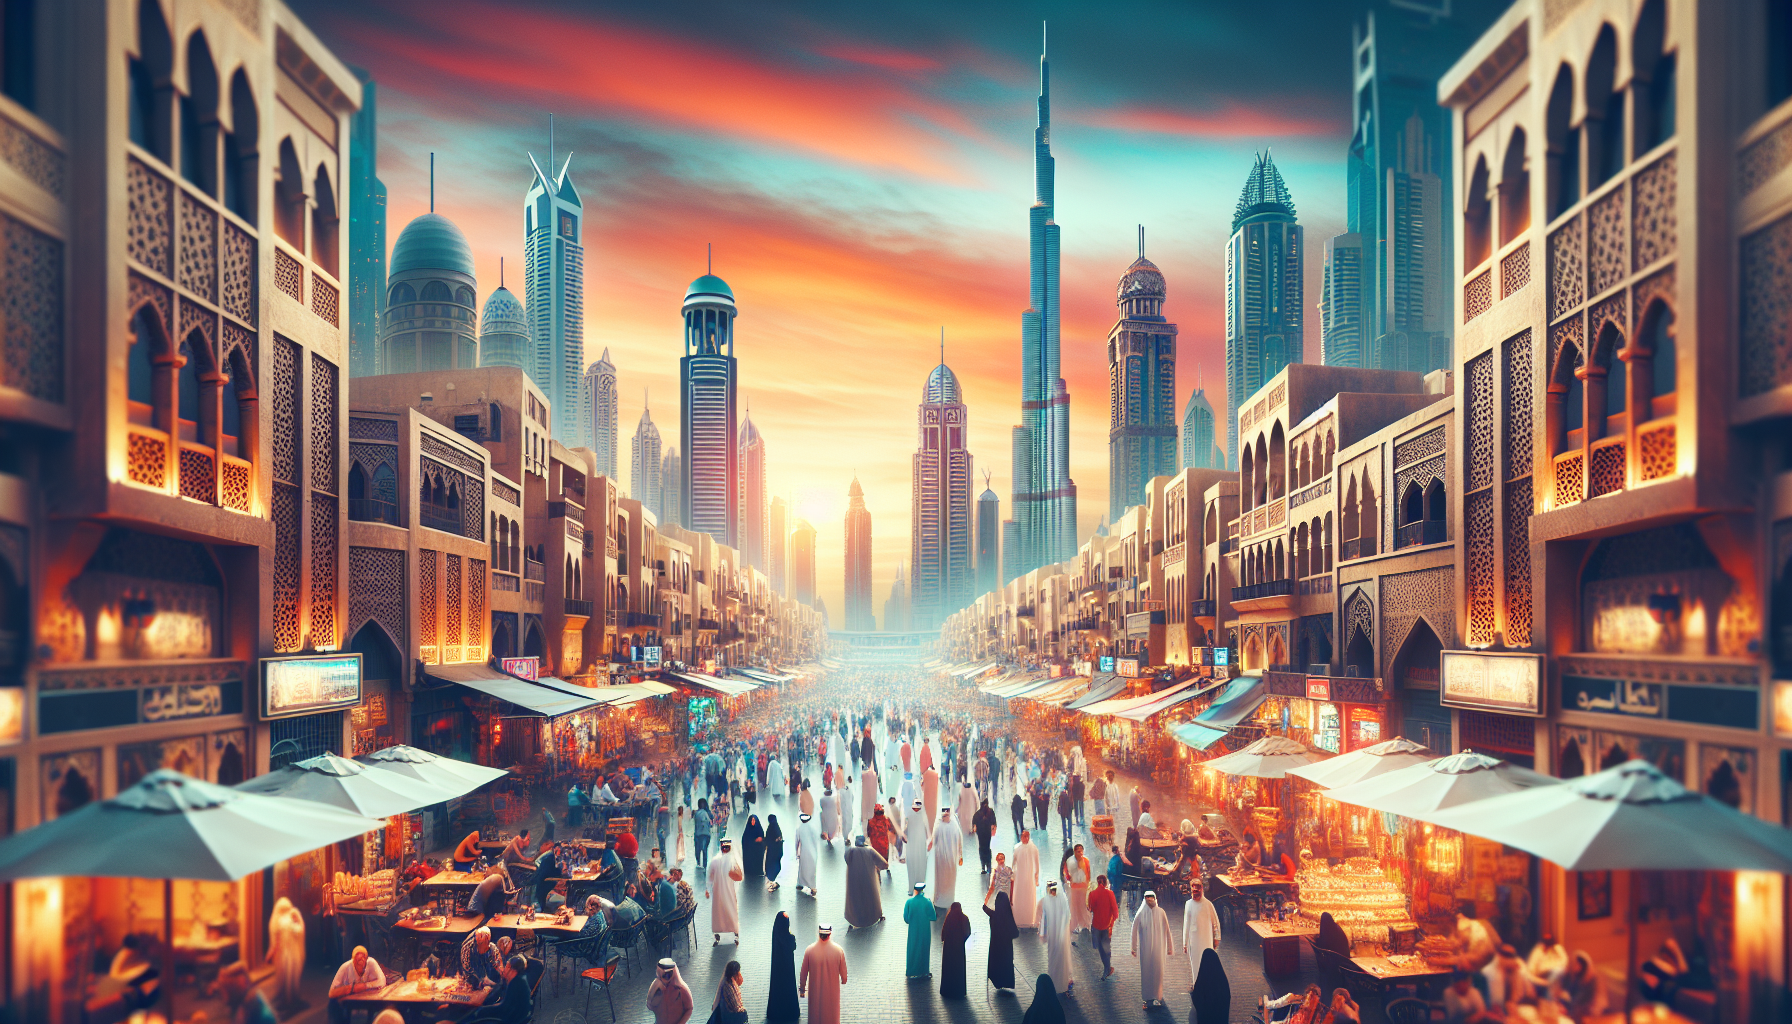 explore the sights and sounds of tourism dubai with our comprehensive travel guide. discover the best attractions, hotels, and activities for an unforgettable trip to this vibrant city.